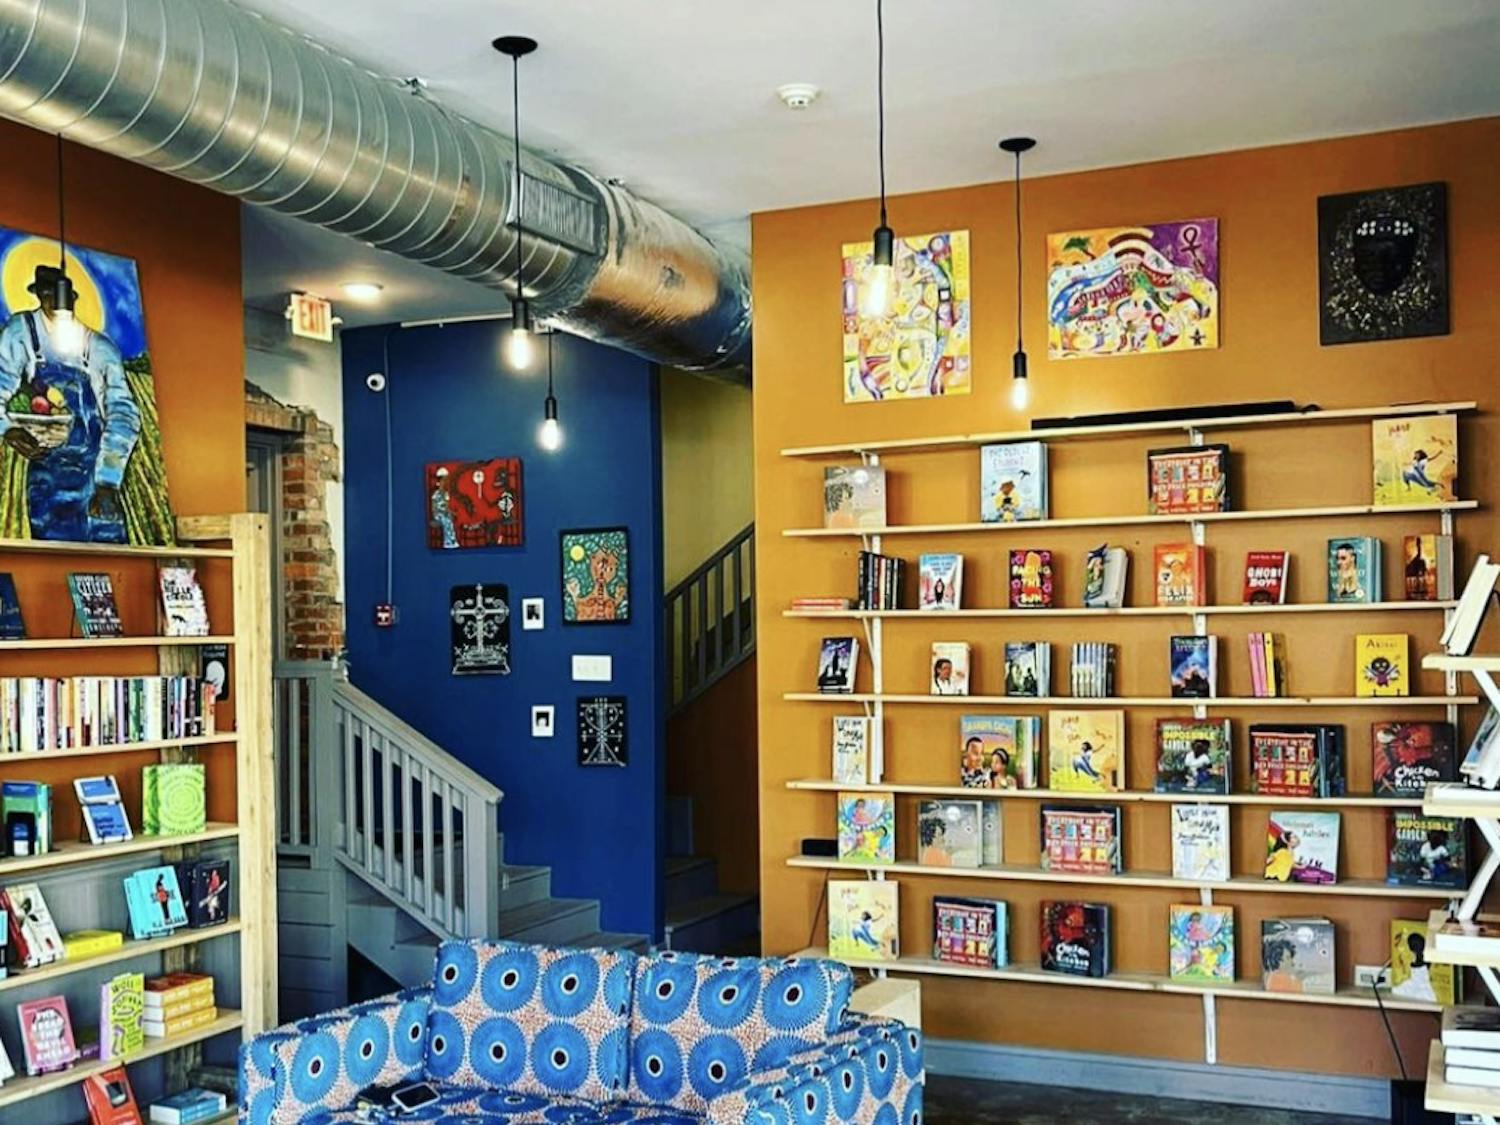 The Rofhiwa Book Café first opened in February 2021 as an online book retailer, then later in May as a physical storefront.&nbsp;